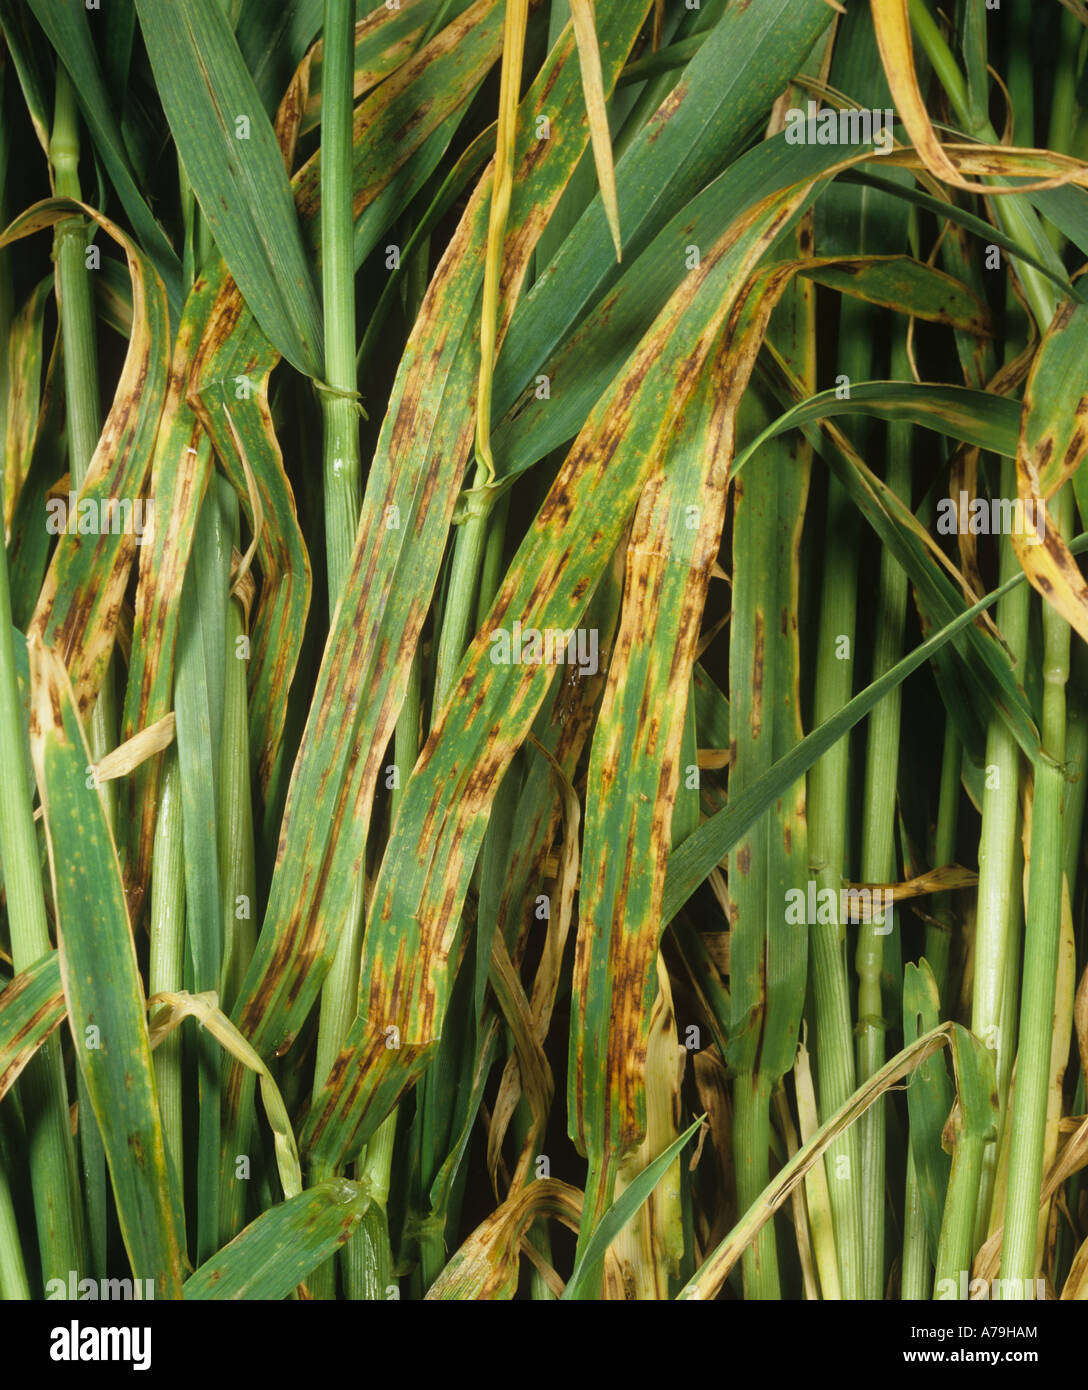 Net blotch Pyrenophora teres infected leaves of maturing barley crop Stock Photo